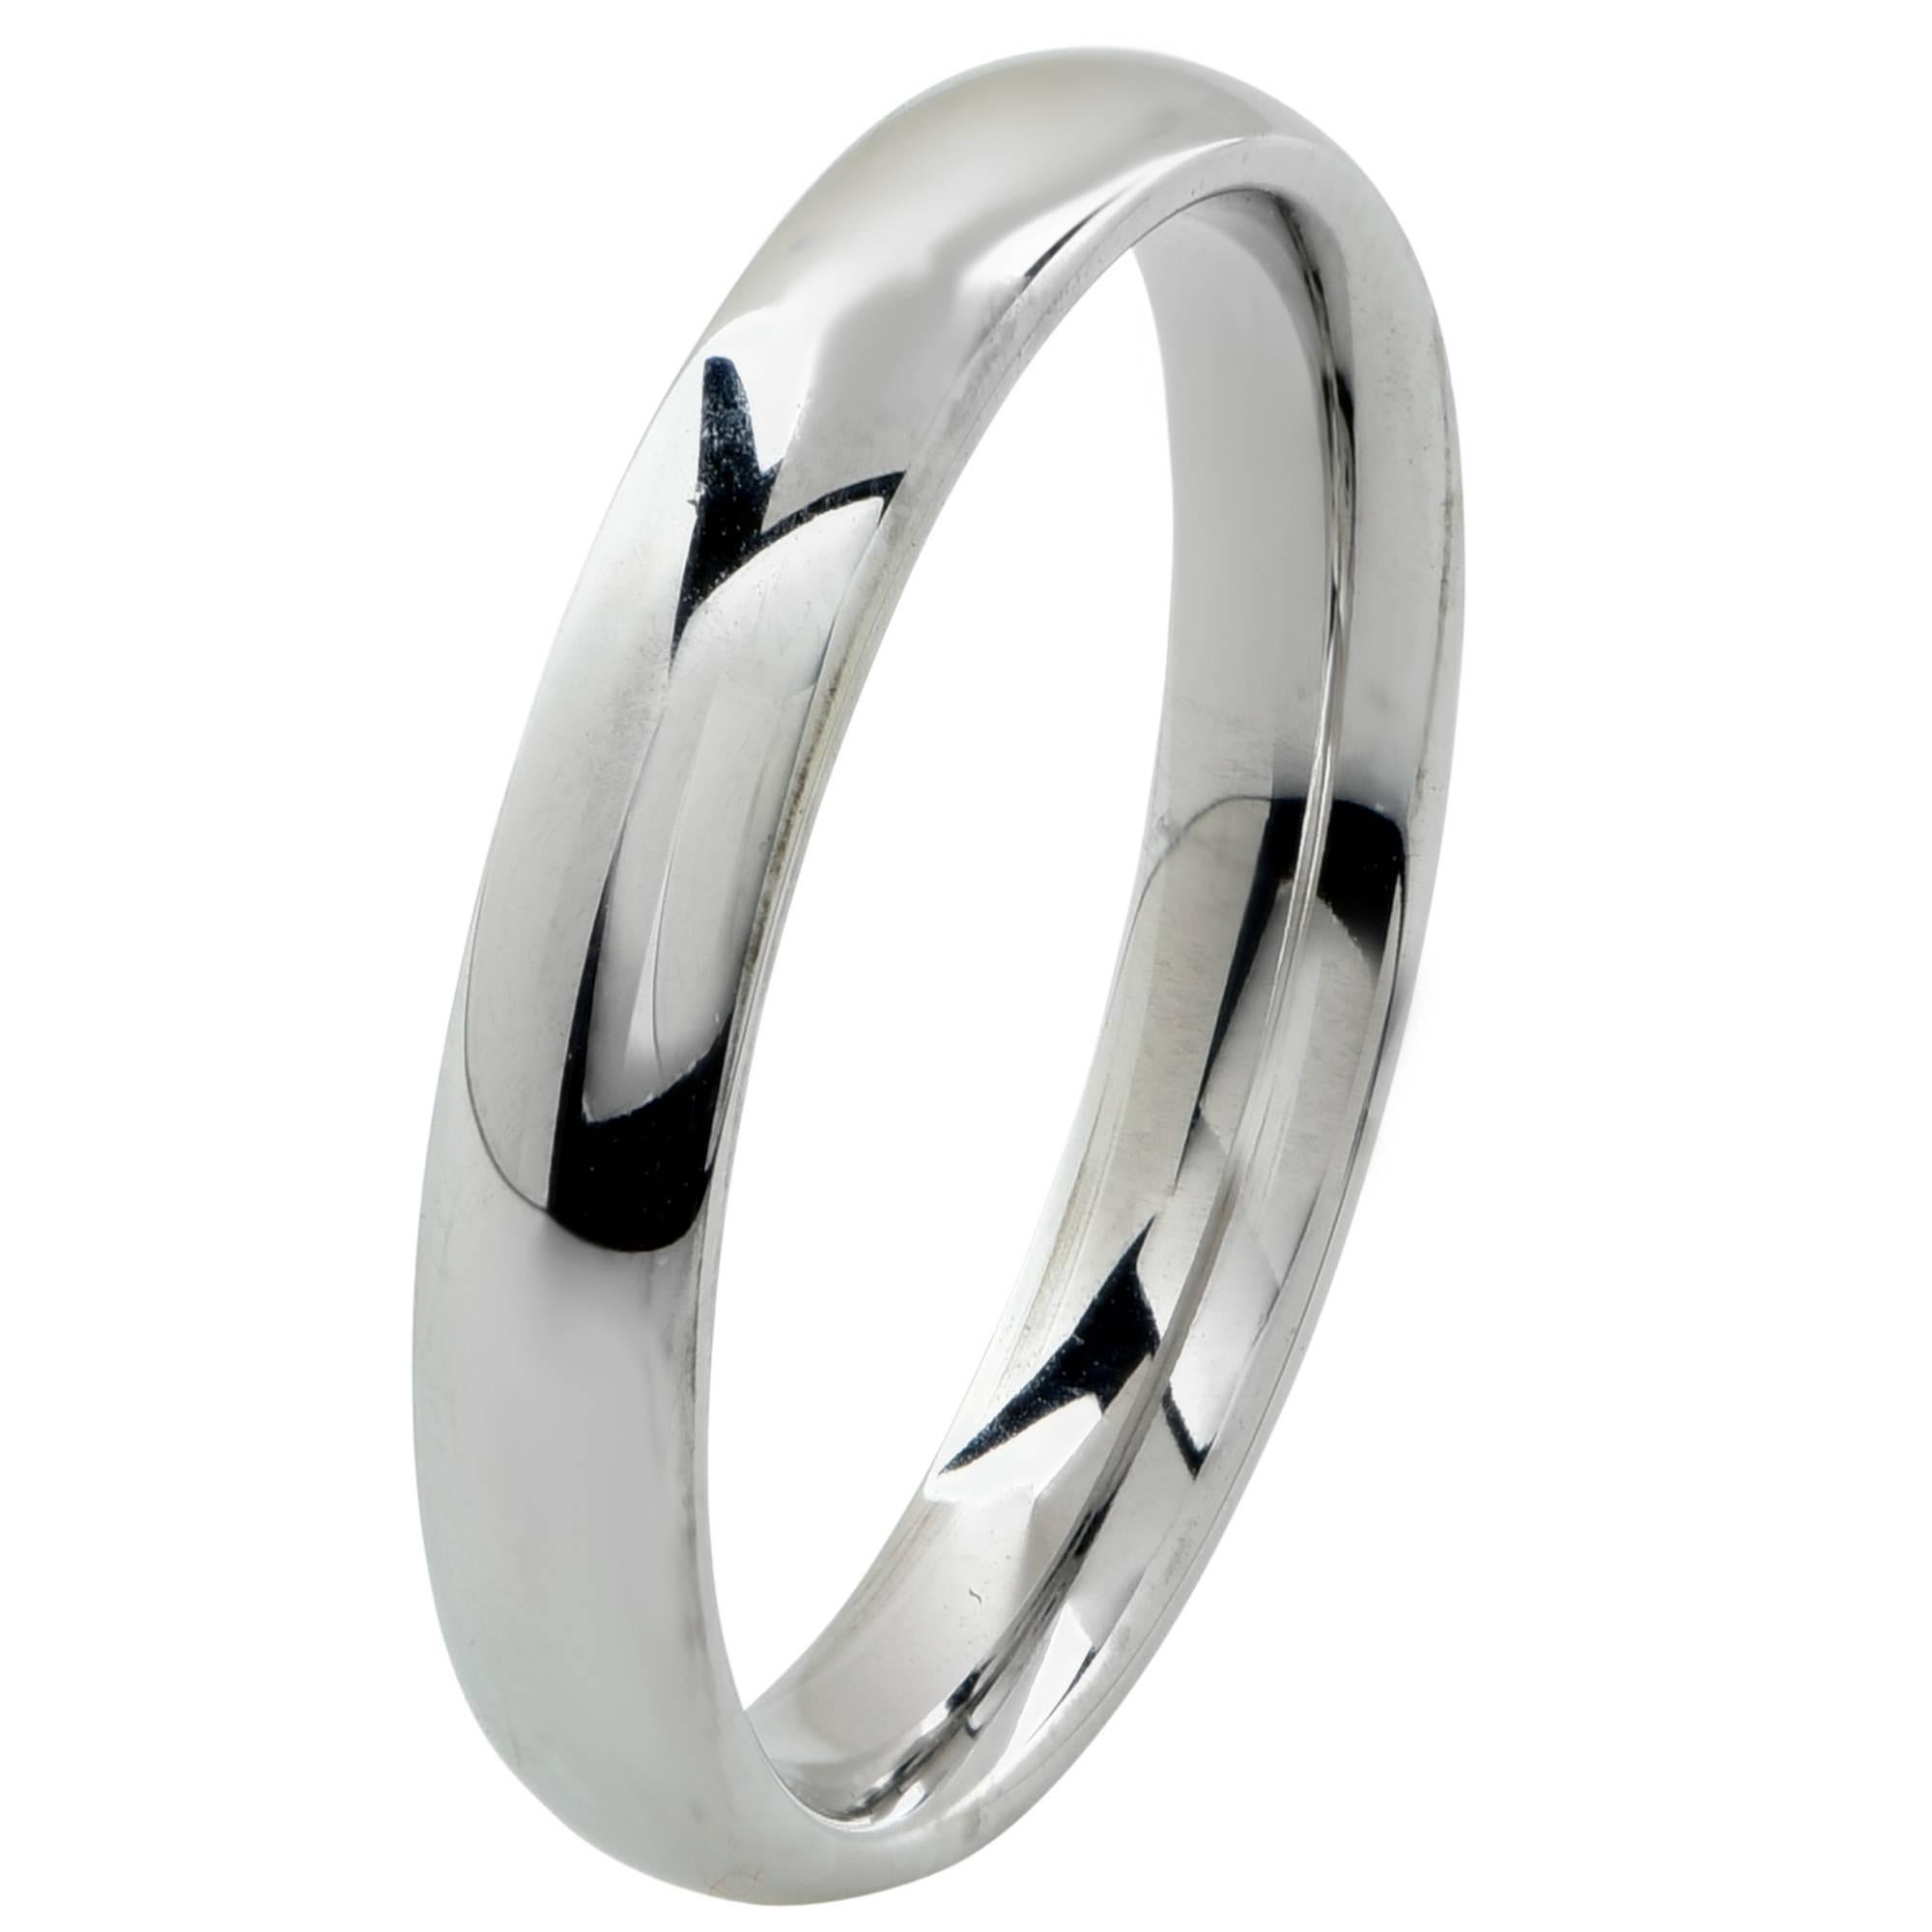 Simple 14K white gold wedding band. Size 9.75. Stamped Bechmark.

Ring size: 9.75 (can be sized up or down)
Metal weight: 4.66 grams

This ring is accompanied by a retail appraisal performed by a GIA Graduate Gemologist.